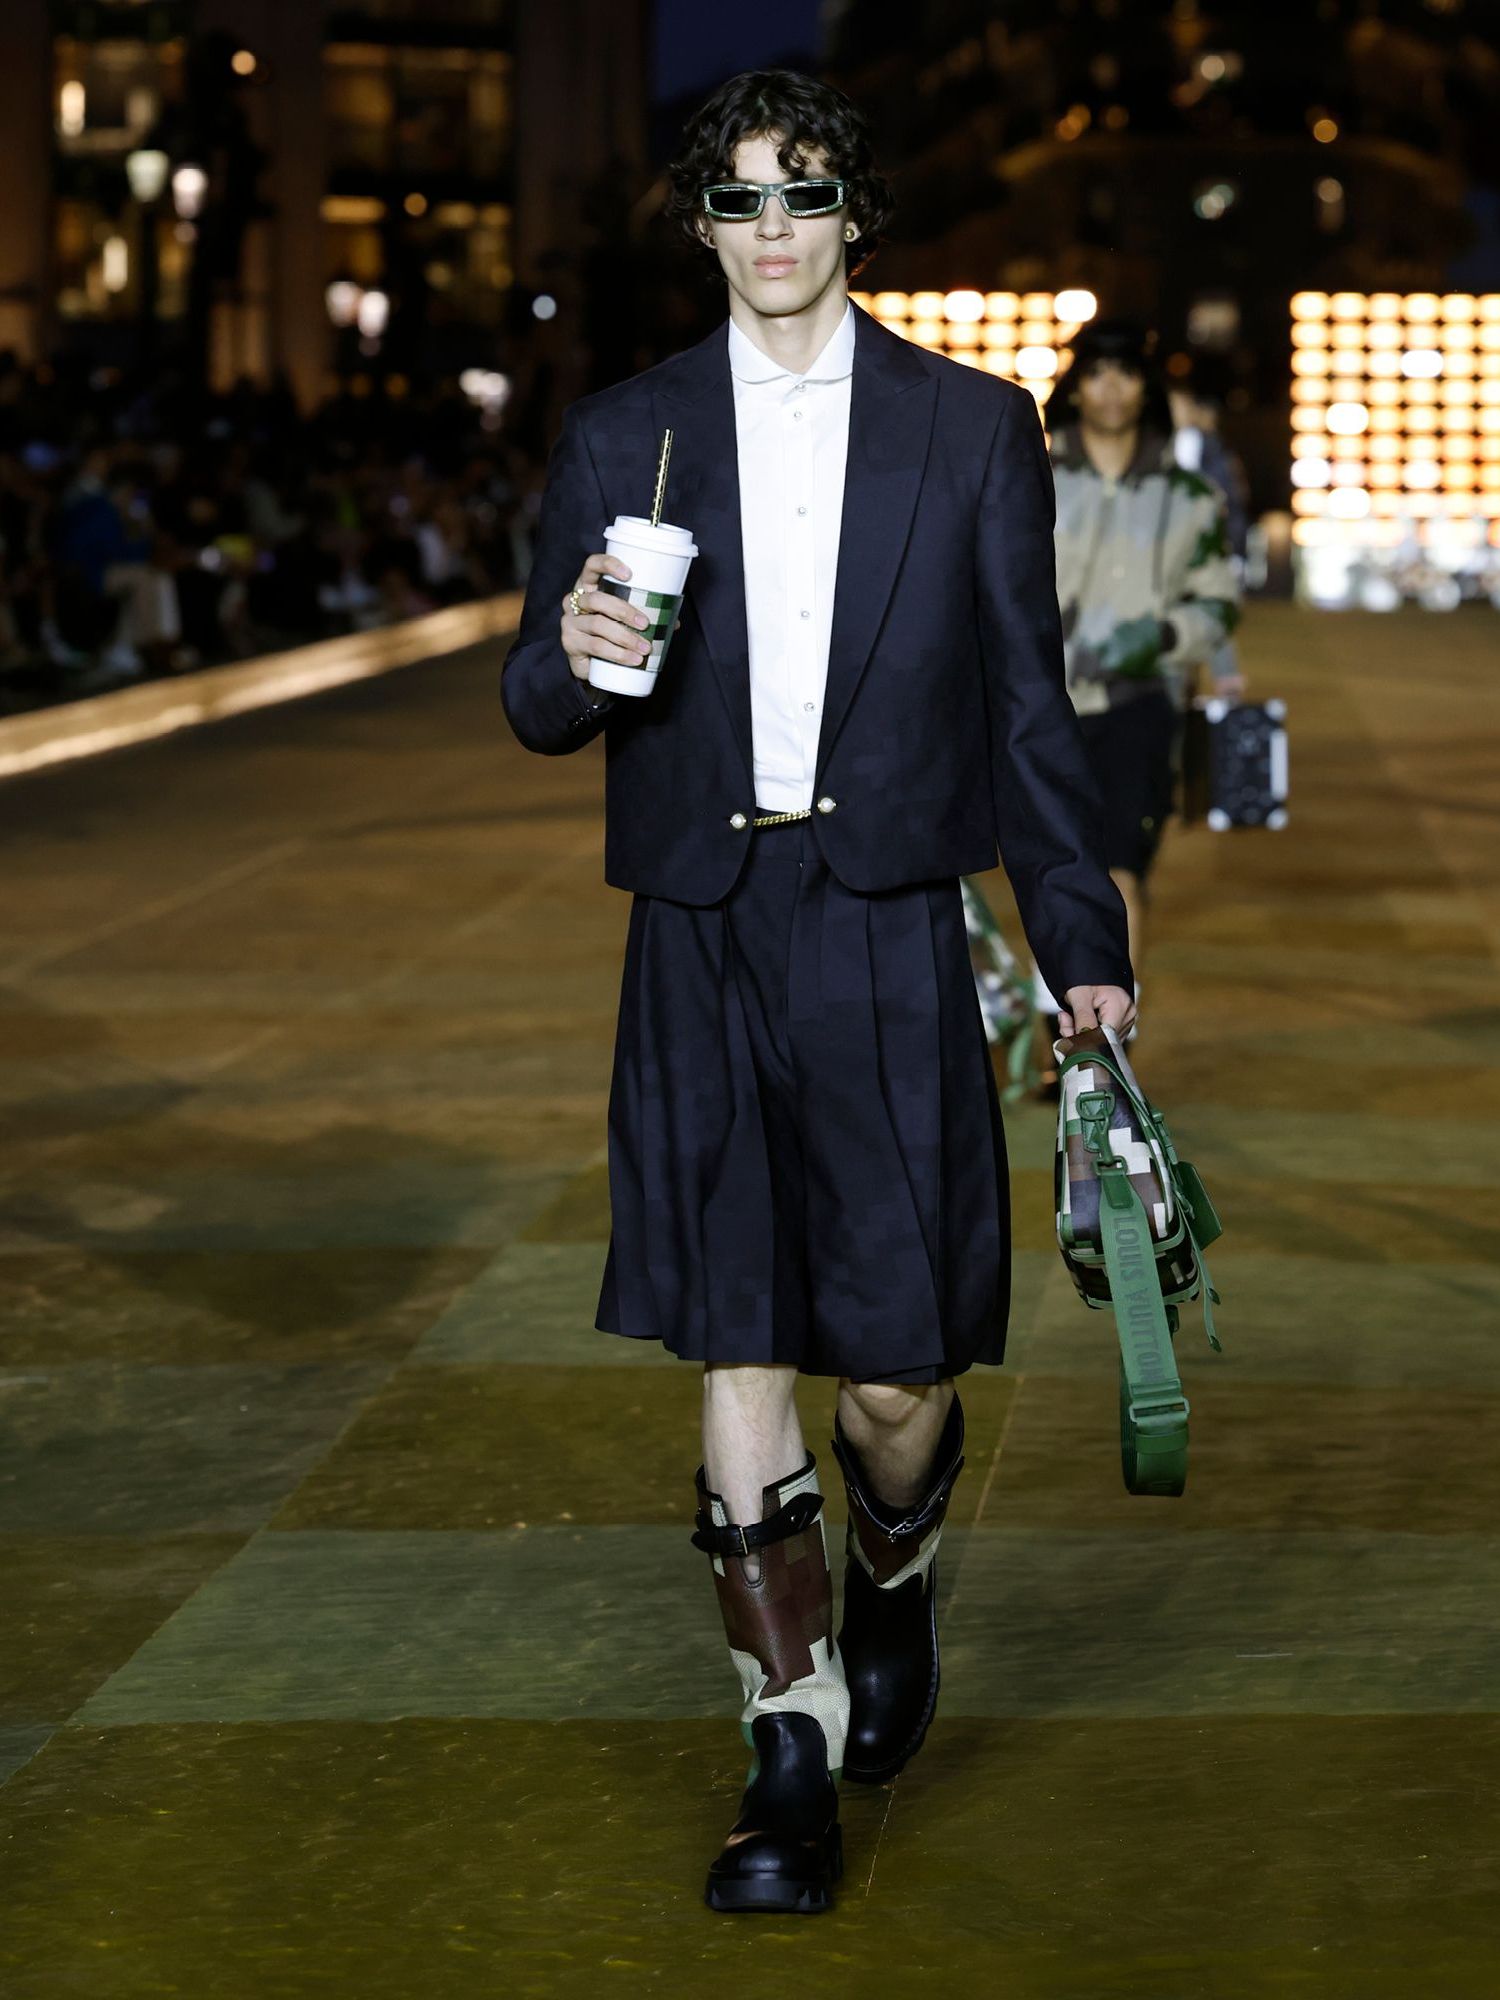 MetroStyleWatch: The Star-Studded Louis Vuitton Men's S/S '24